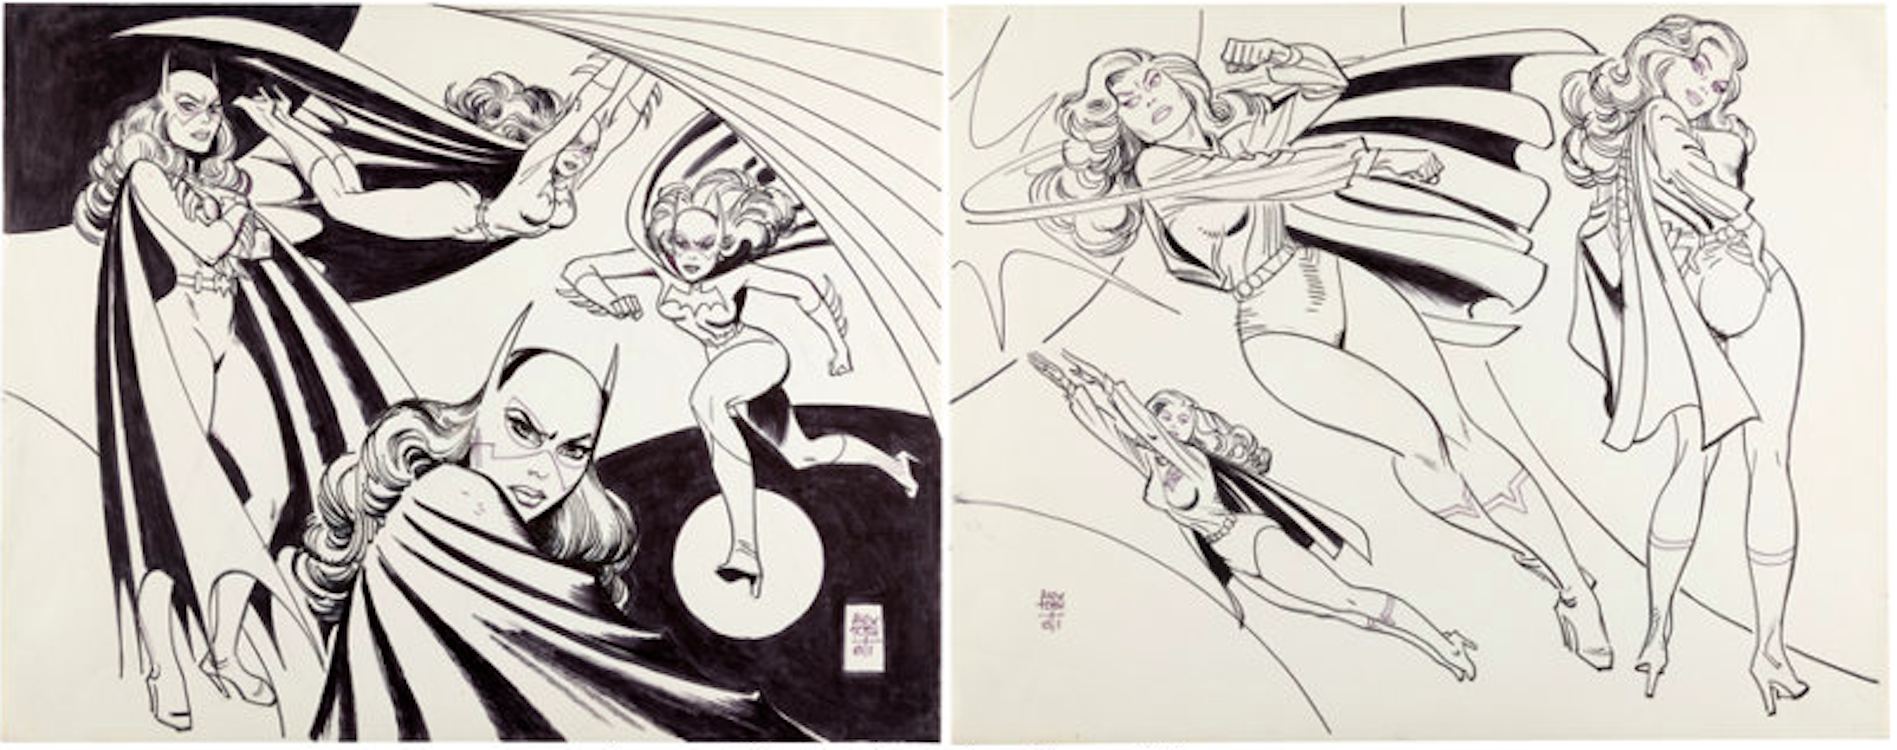 Batgirl & Supergirl Underoos Illustration by Alex Toth sold for $5,020. Click here to get your original art appraised.